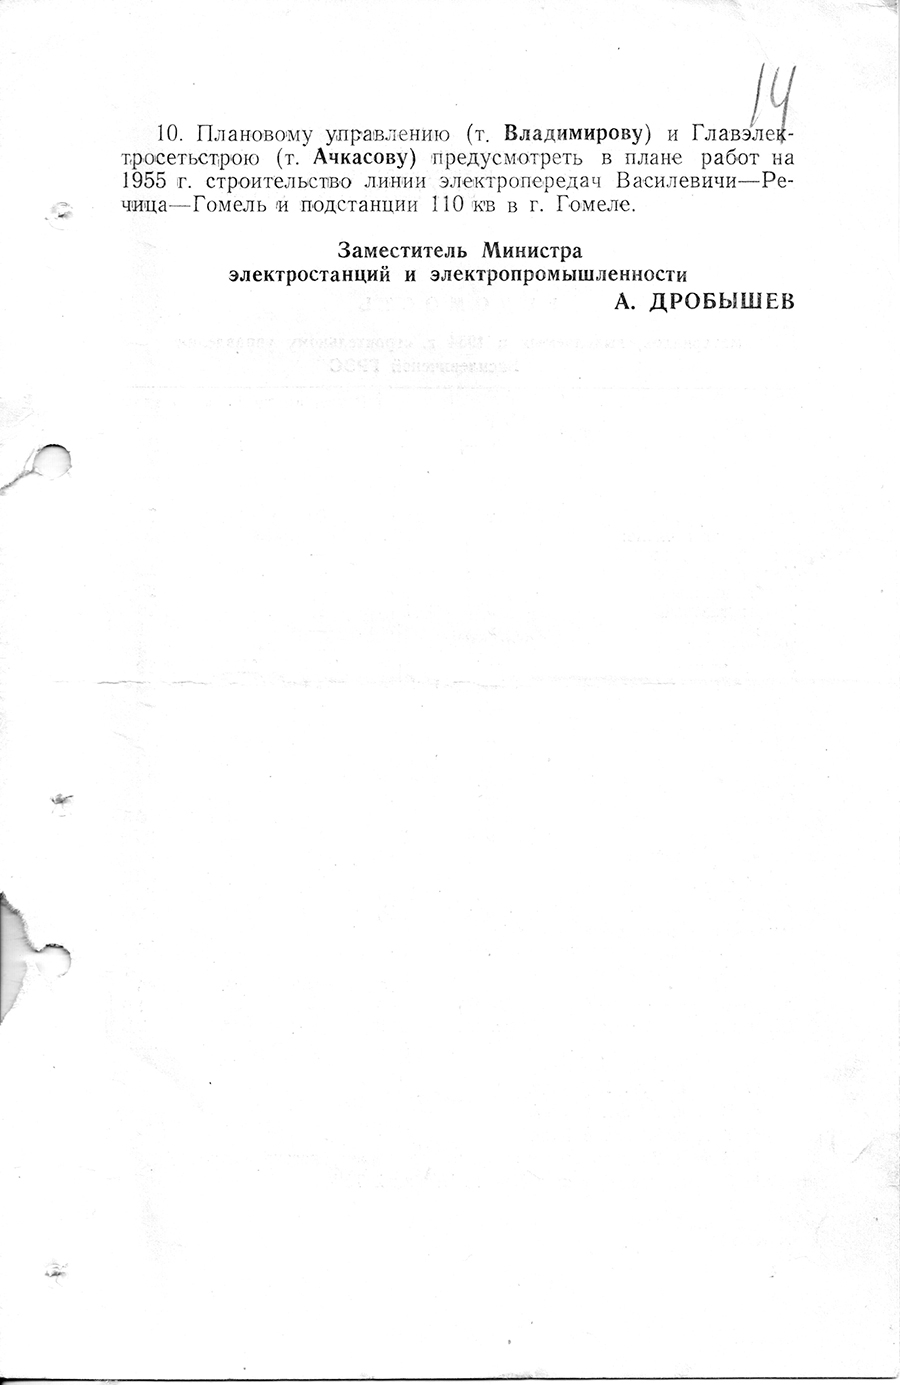 Order No. 206/A of the Ministry of Power Plants and Electric Medications of the USSR on the forcing of the construction of the Vasilevichi State District Power Plant-с. 2